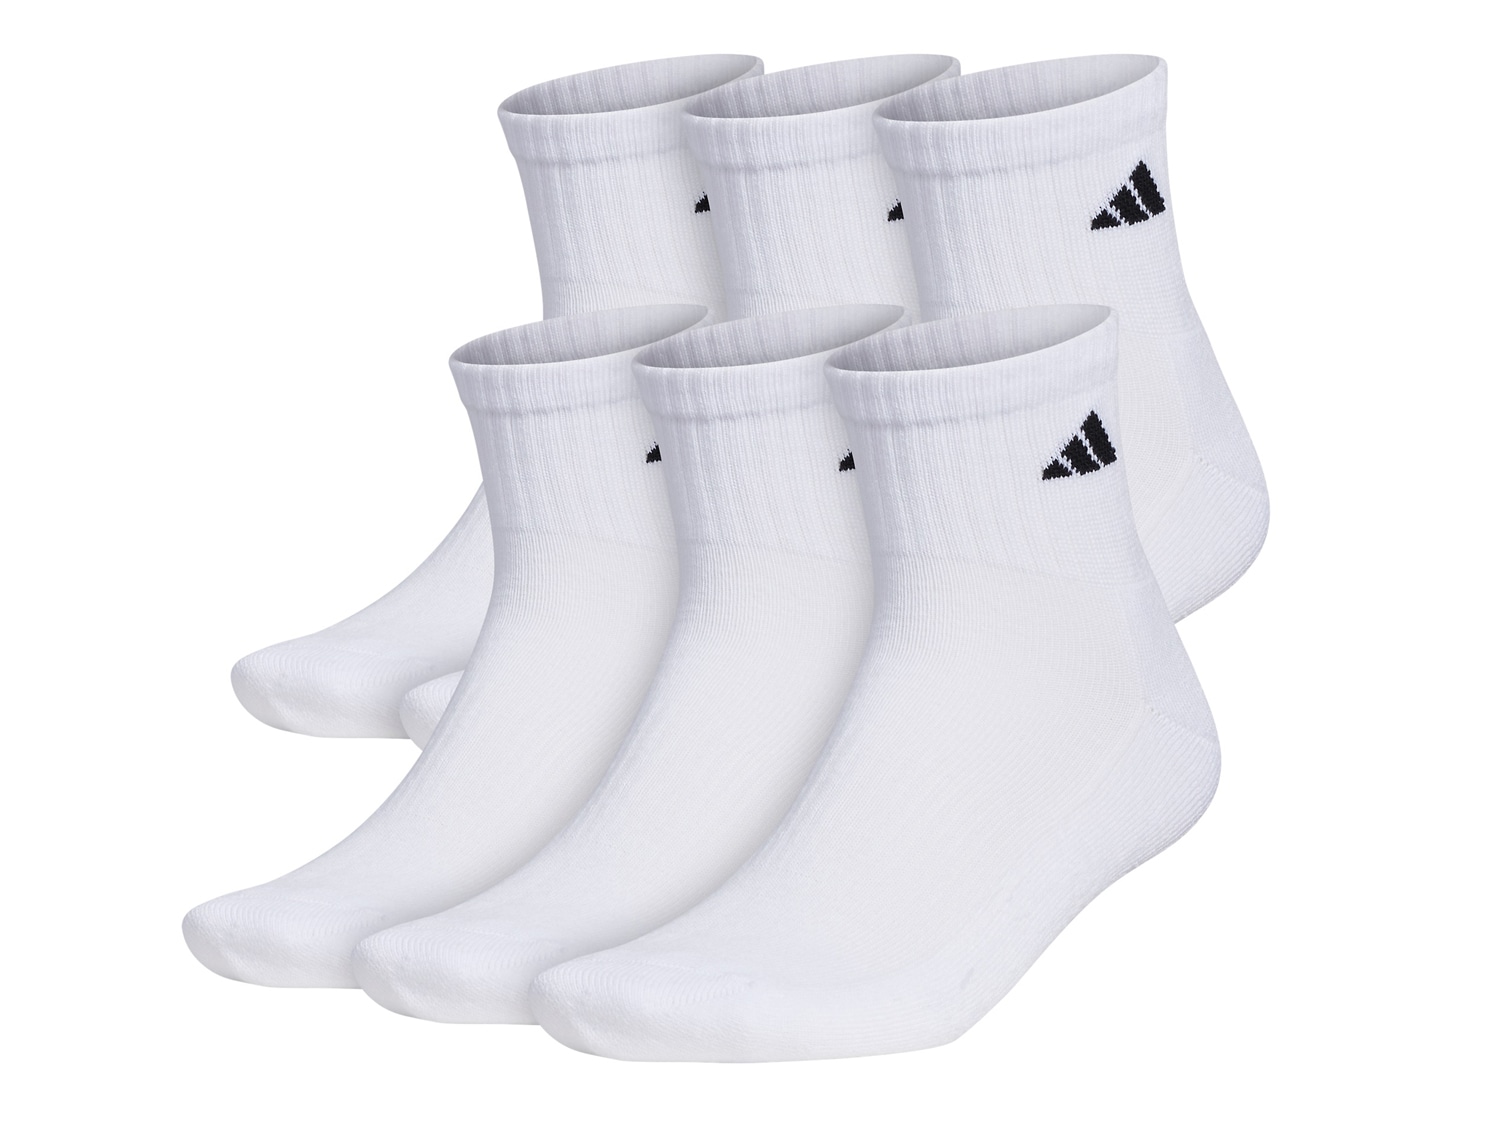 Boody | Men's Cushioned Ankle Socks in White | Size I 6-11